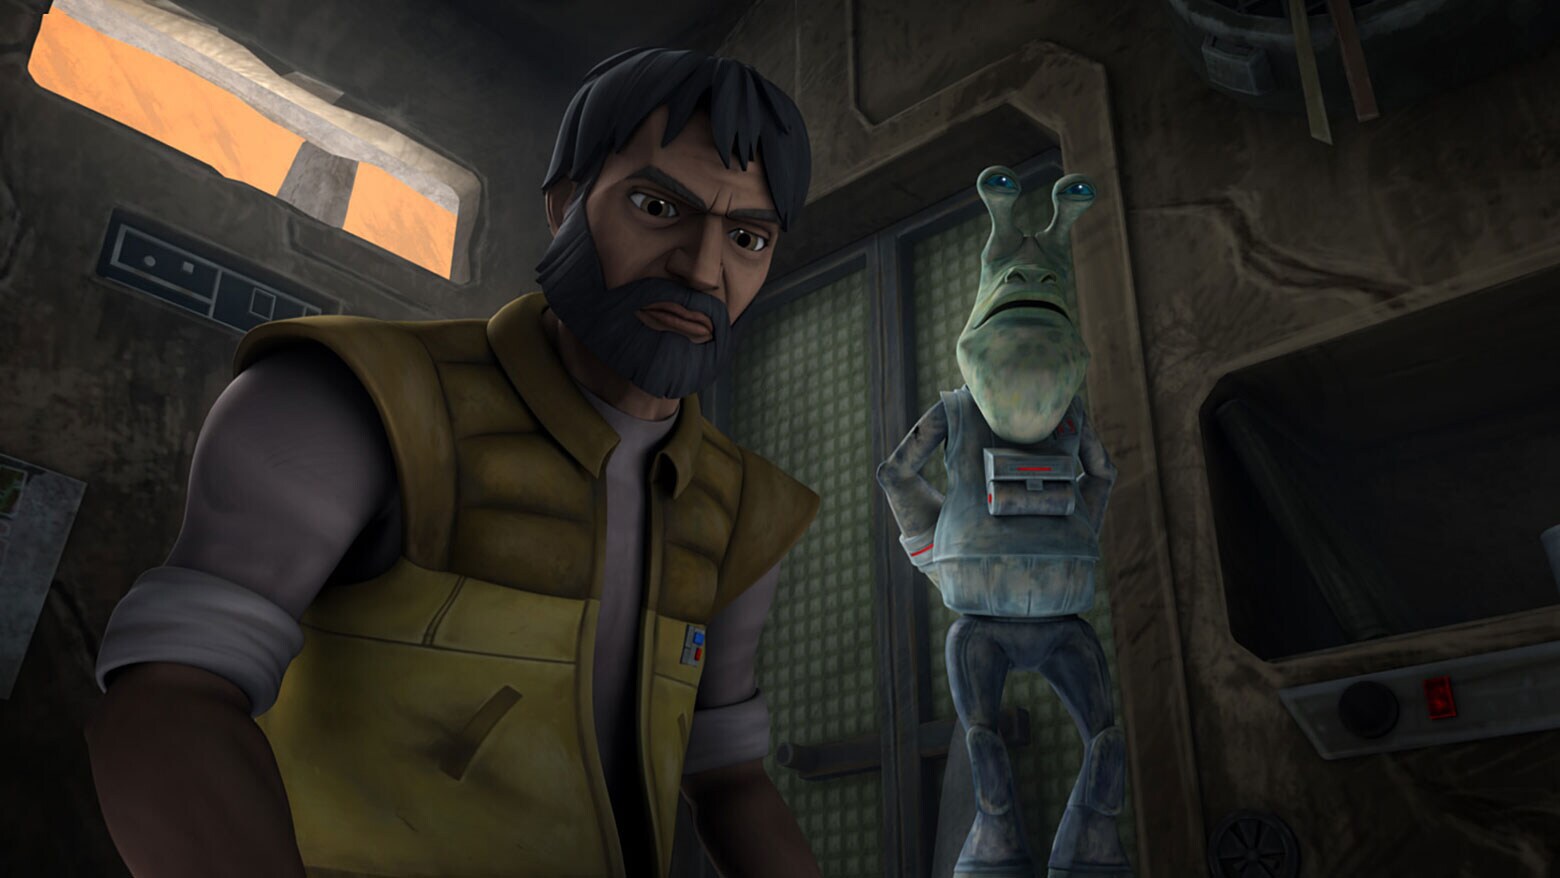 Gregor in The Clone Wars "Missing in Action"